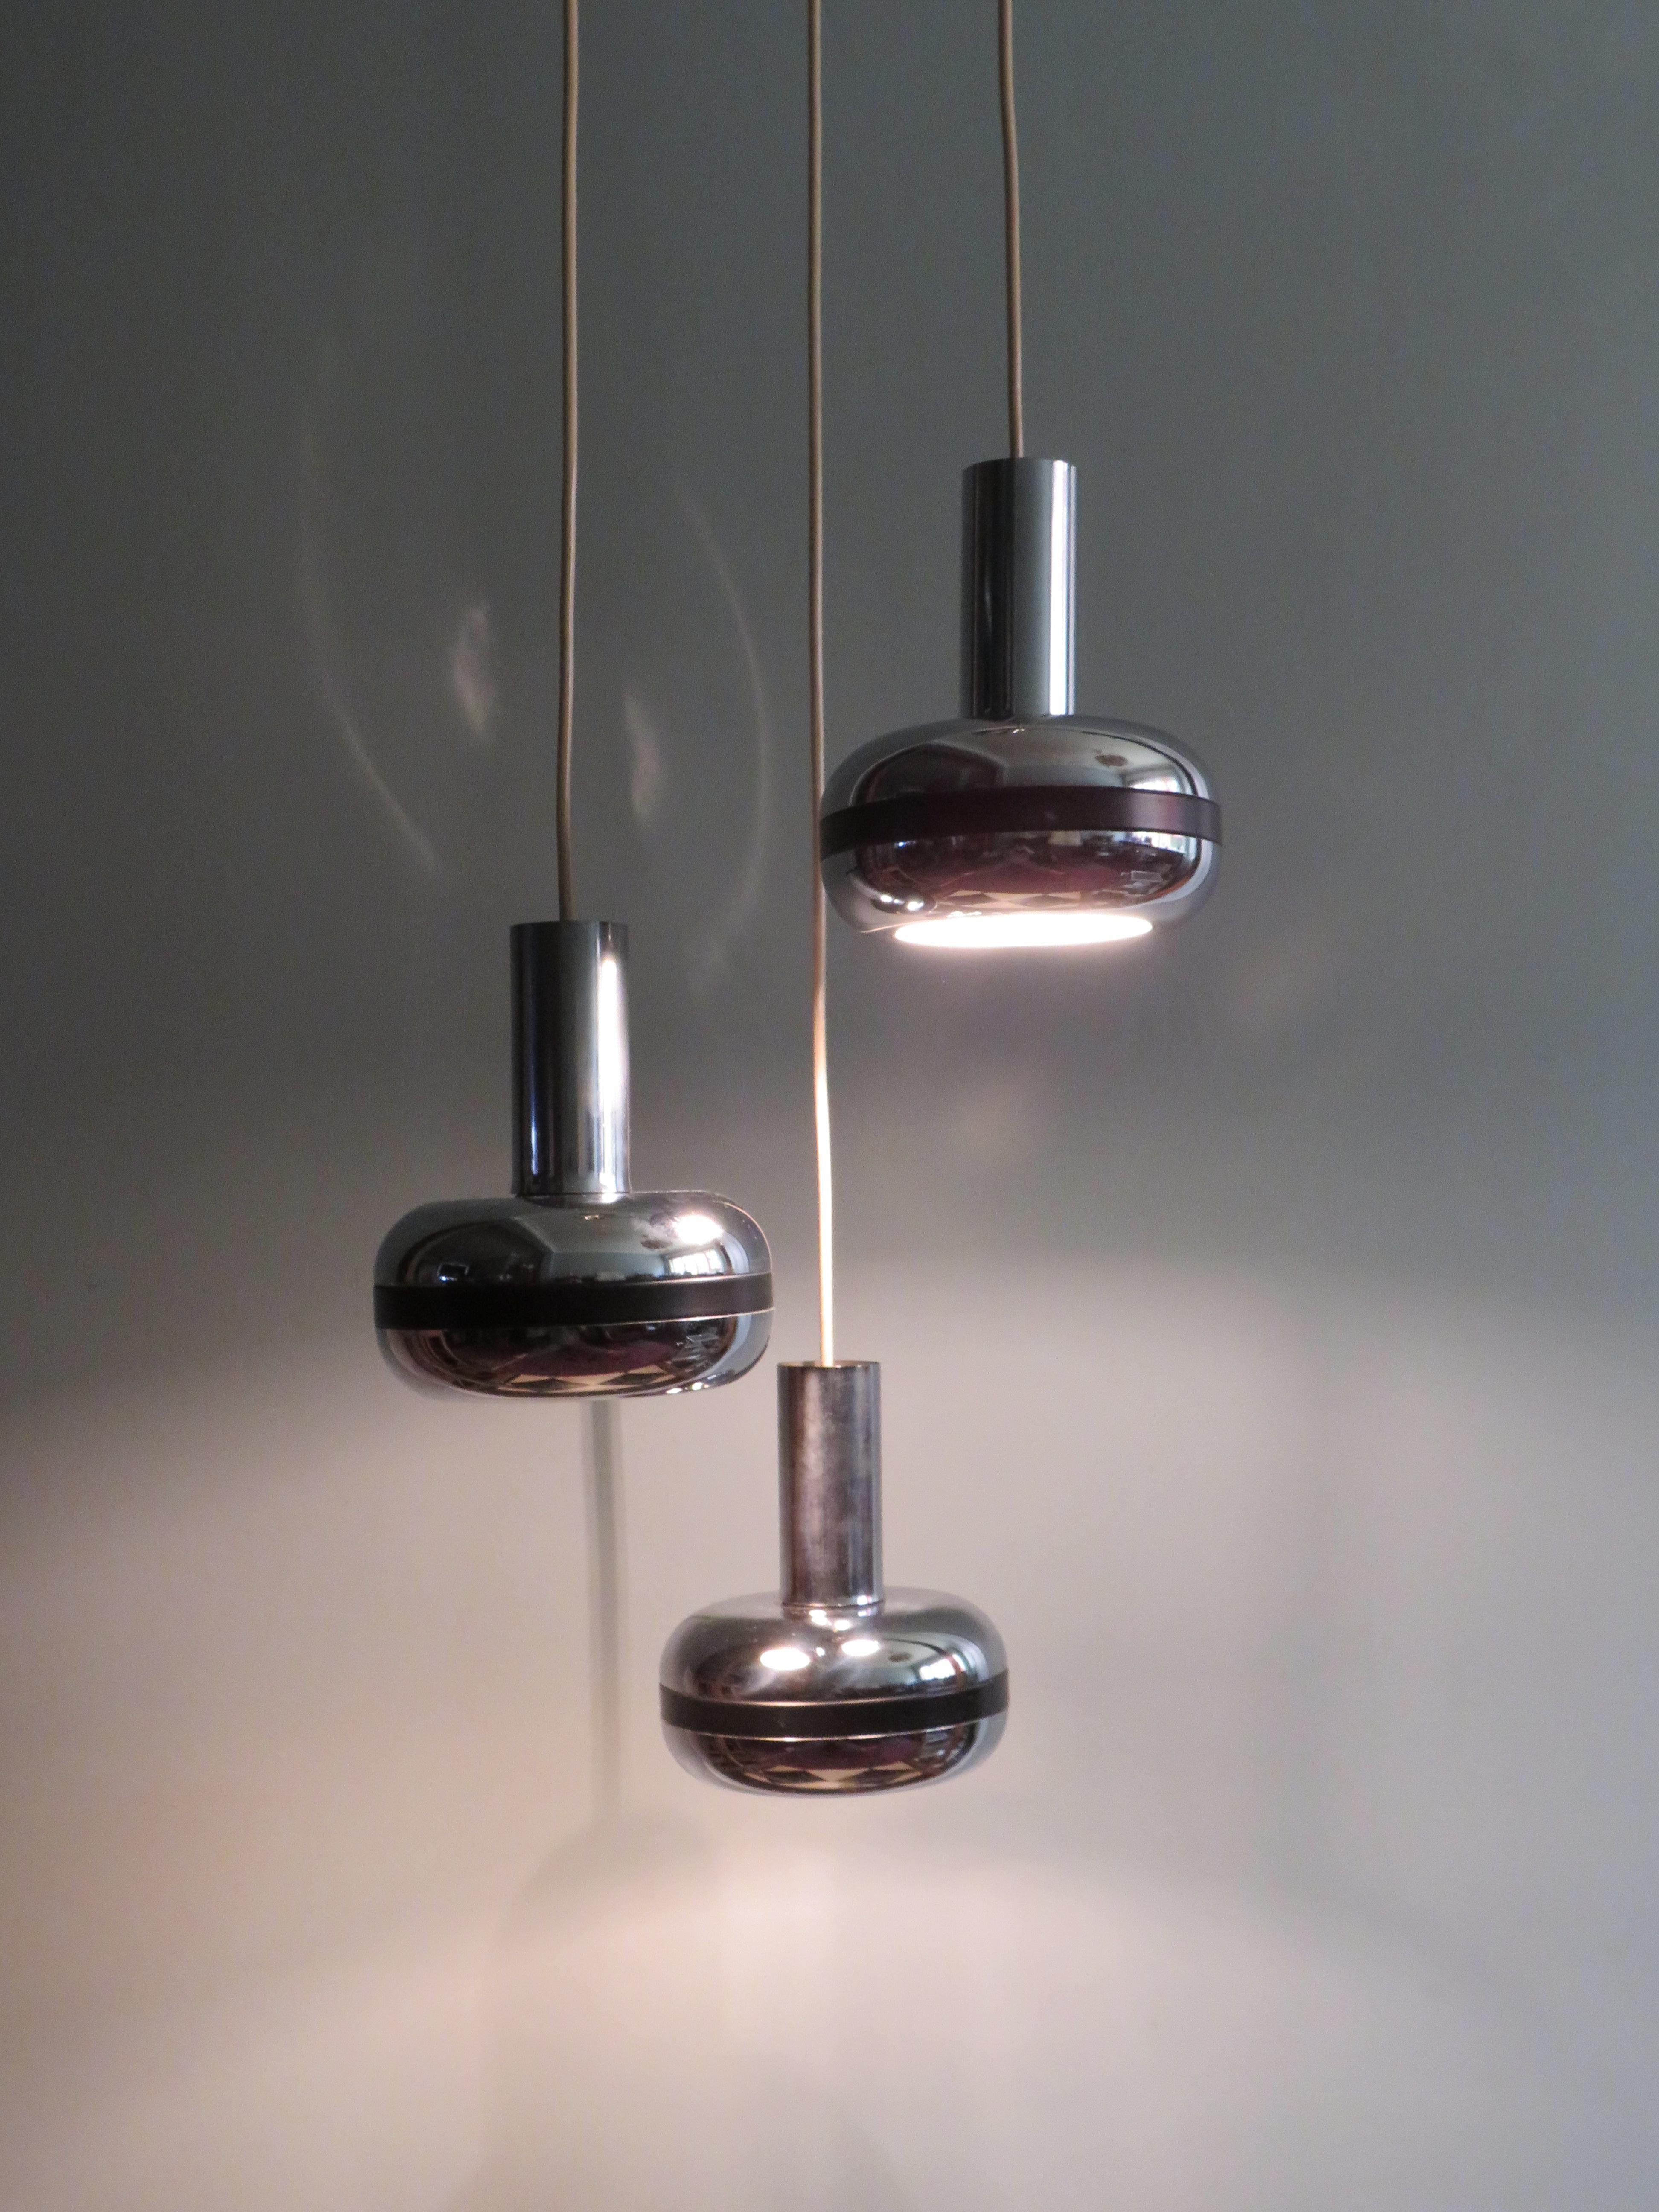 Cascade pendant with 3 chrome globes 1970s.
The cascade pendant has 3 chrome globes with a black detail around and a chorme ceiling plate.
The height of the 3 globes can be adjusted individually and have each a E 27 fitting.
The maximum height of